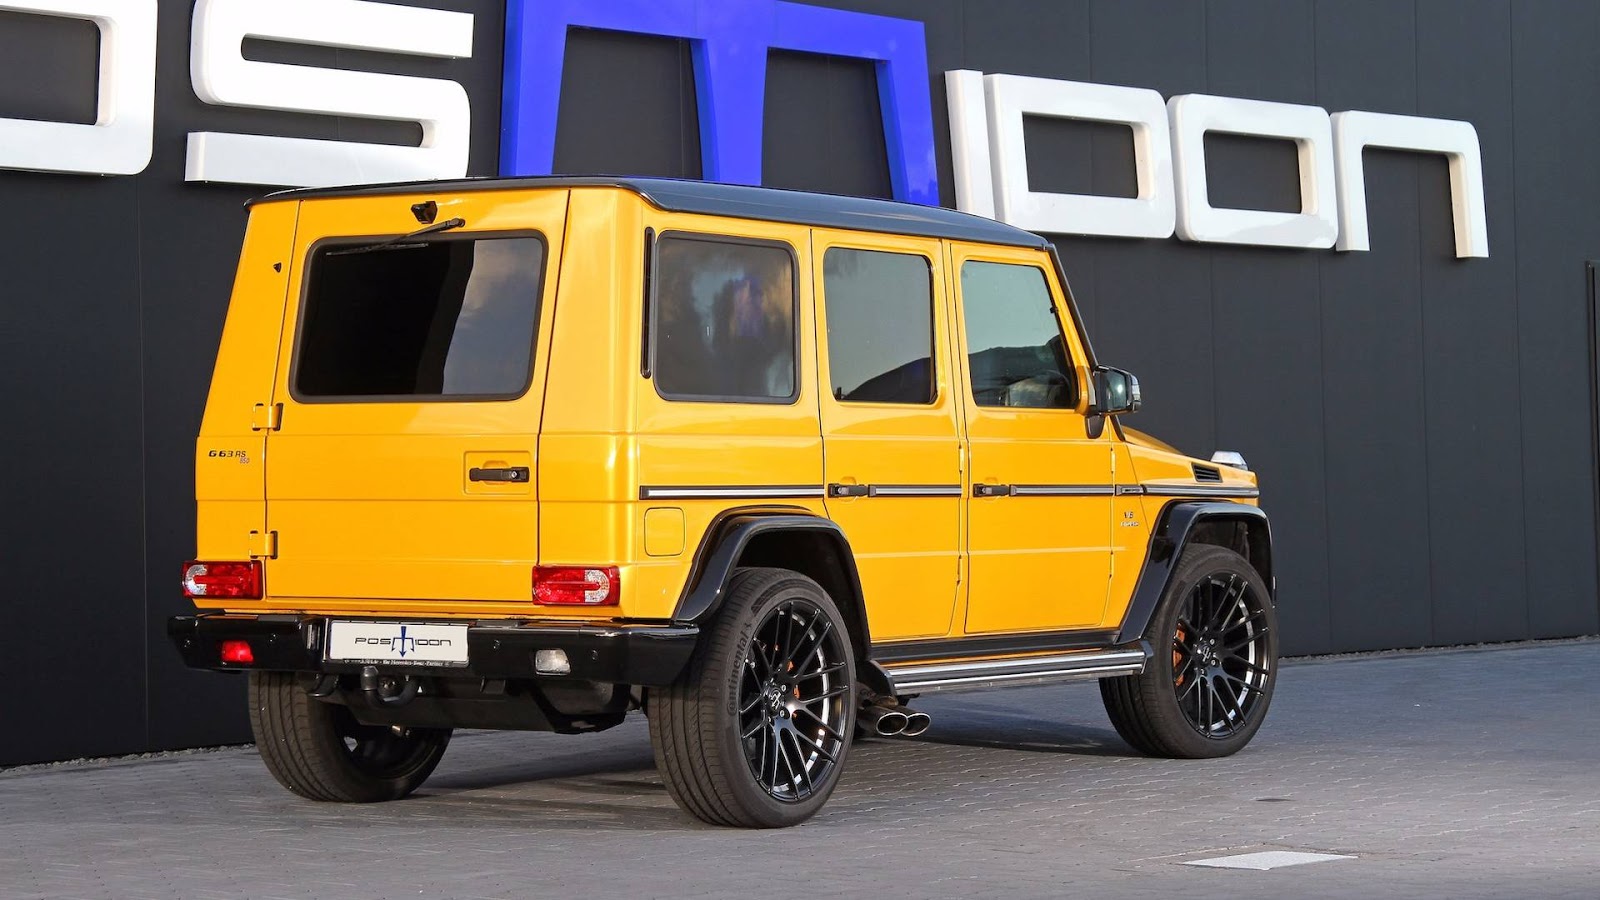 Mercedes-AMG G63 by Posaidon